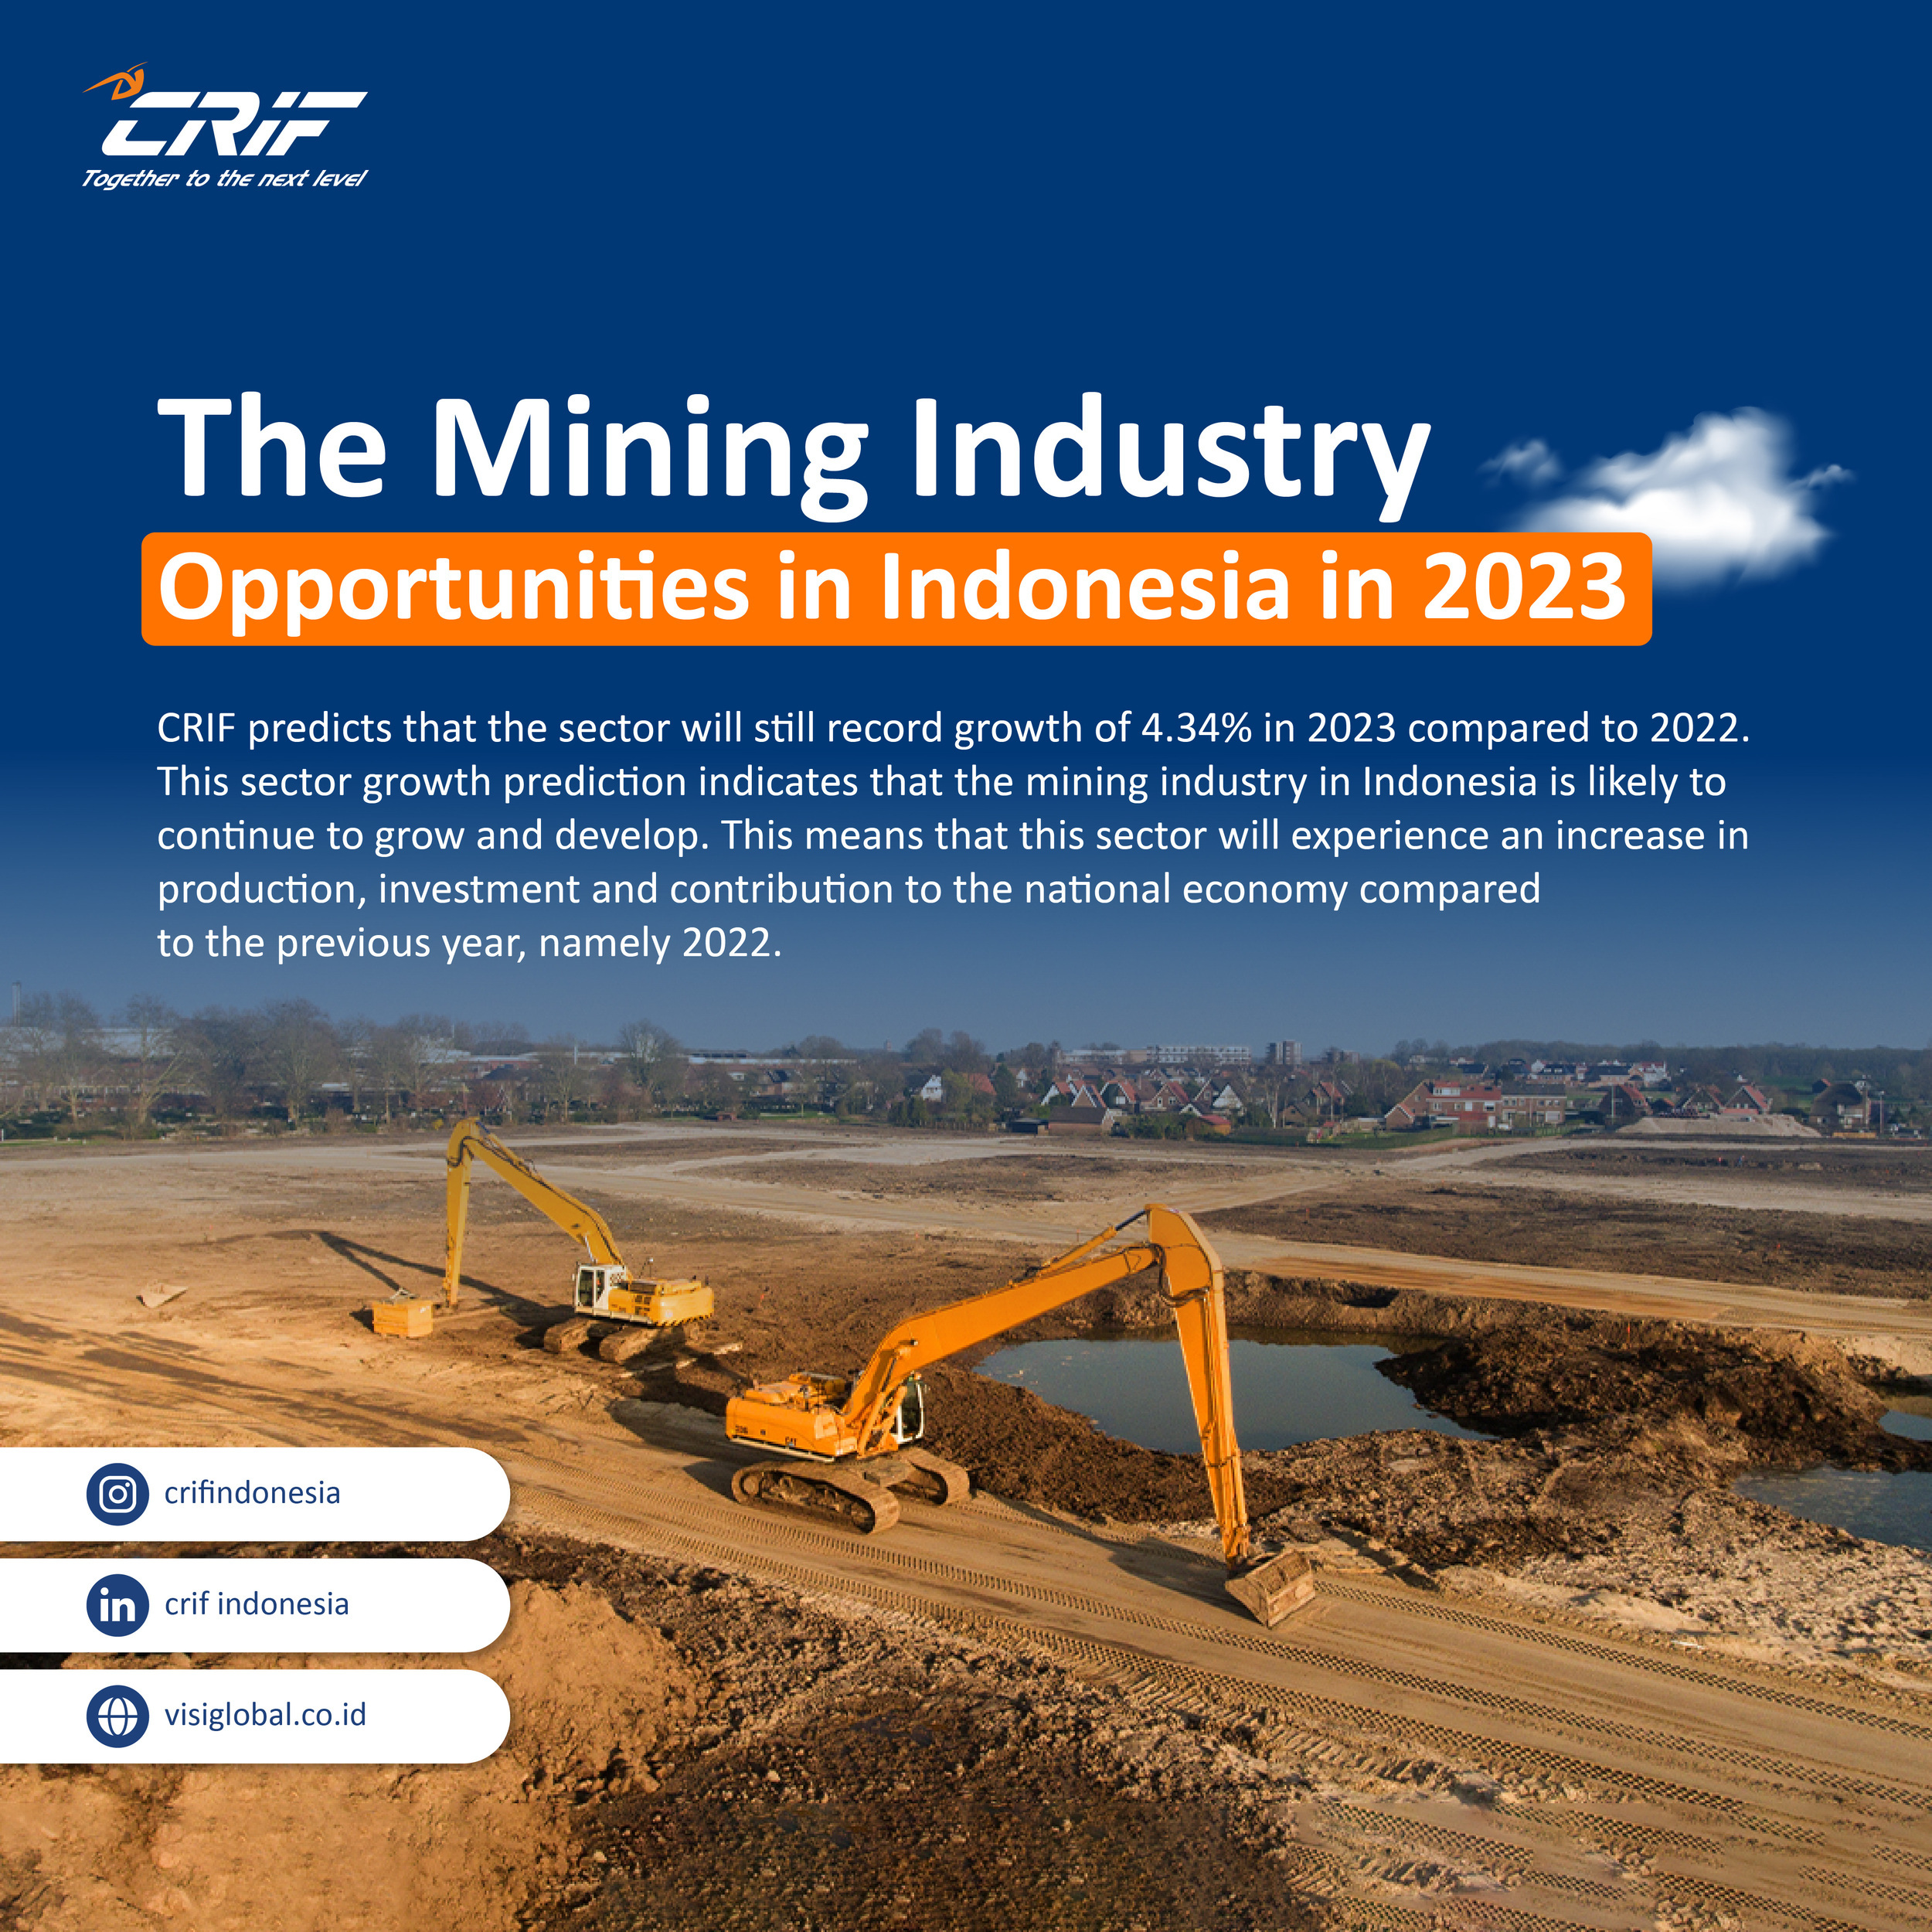 The Mining Industry Opportunities in Indonesia in 2023